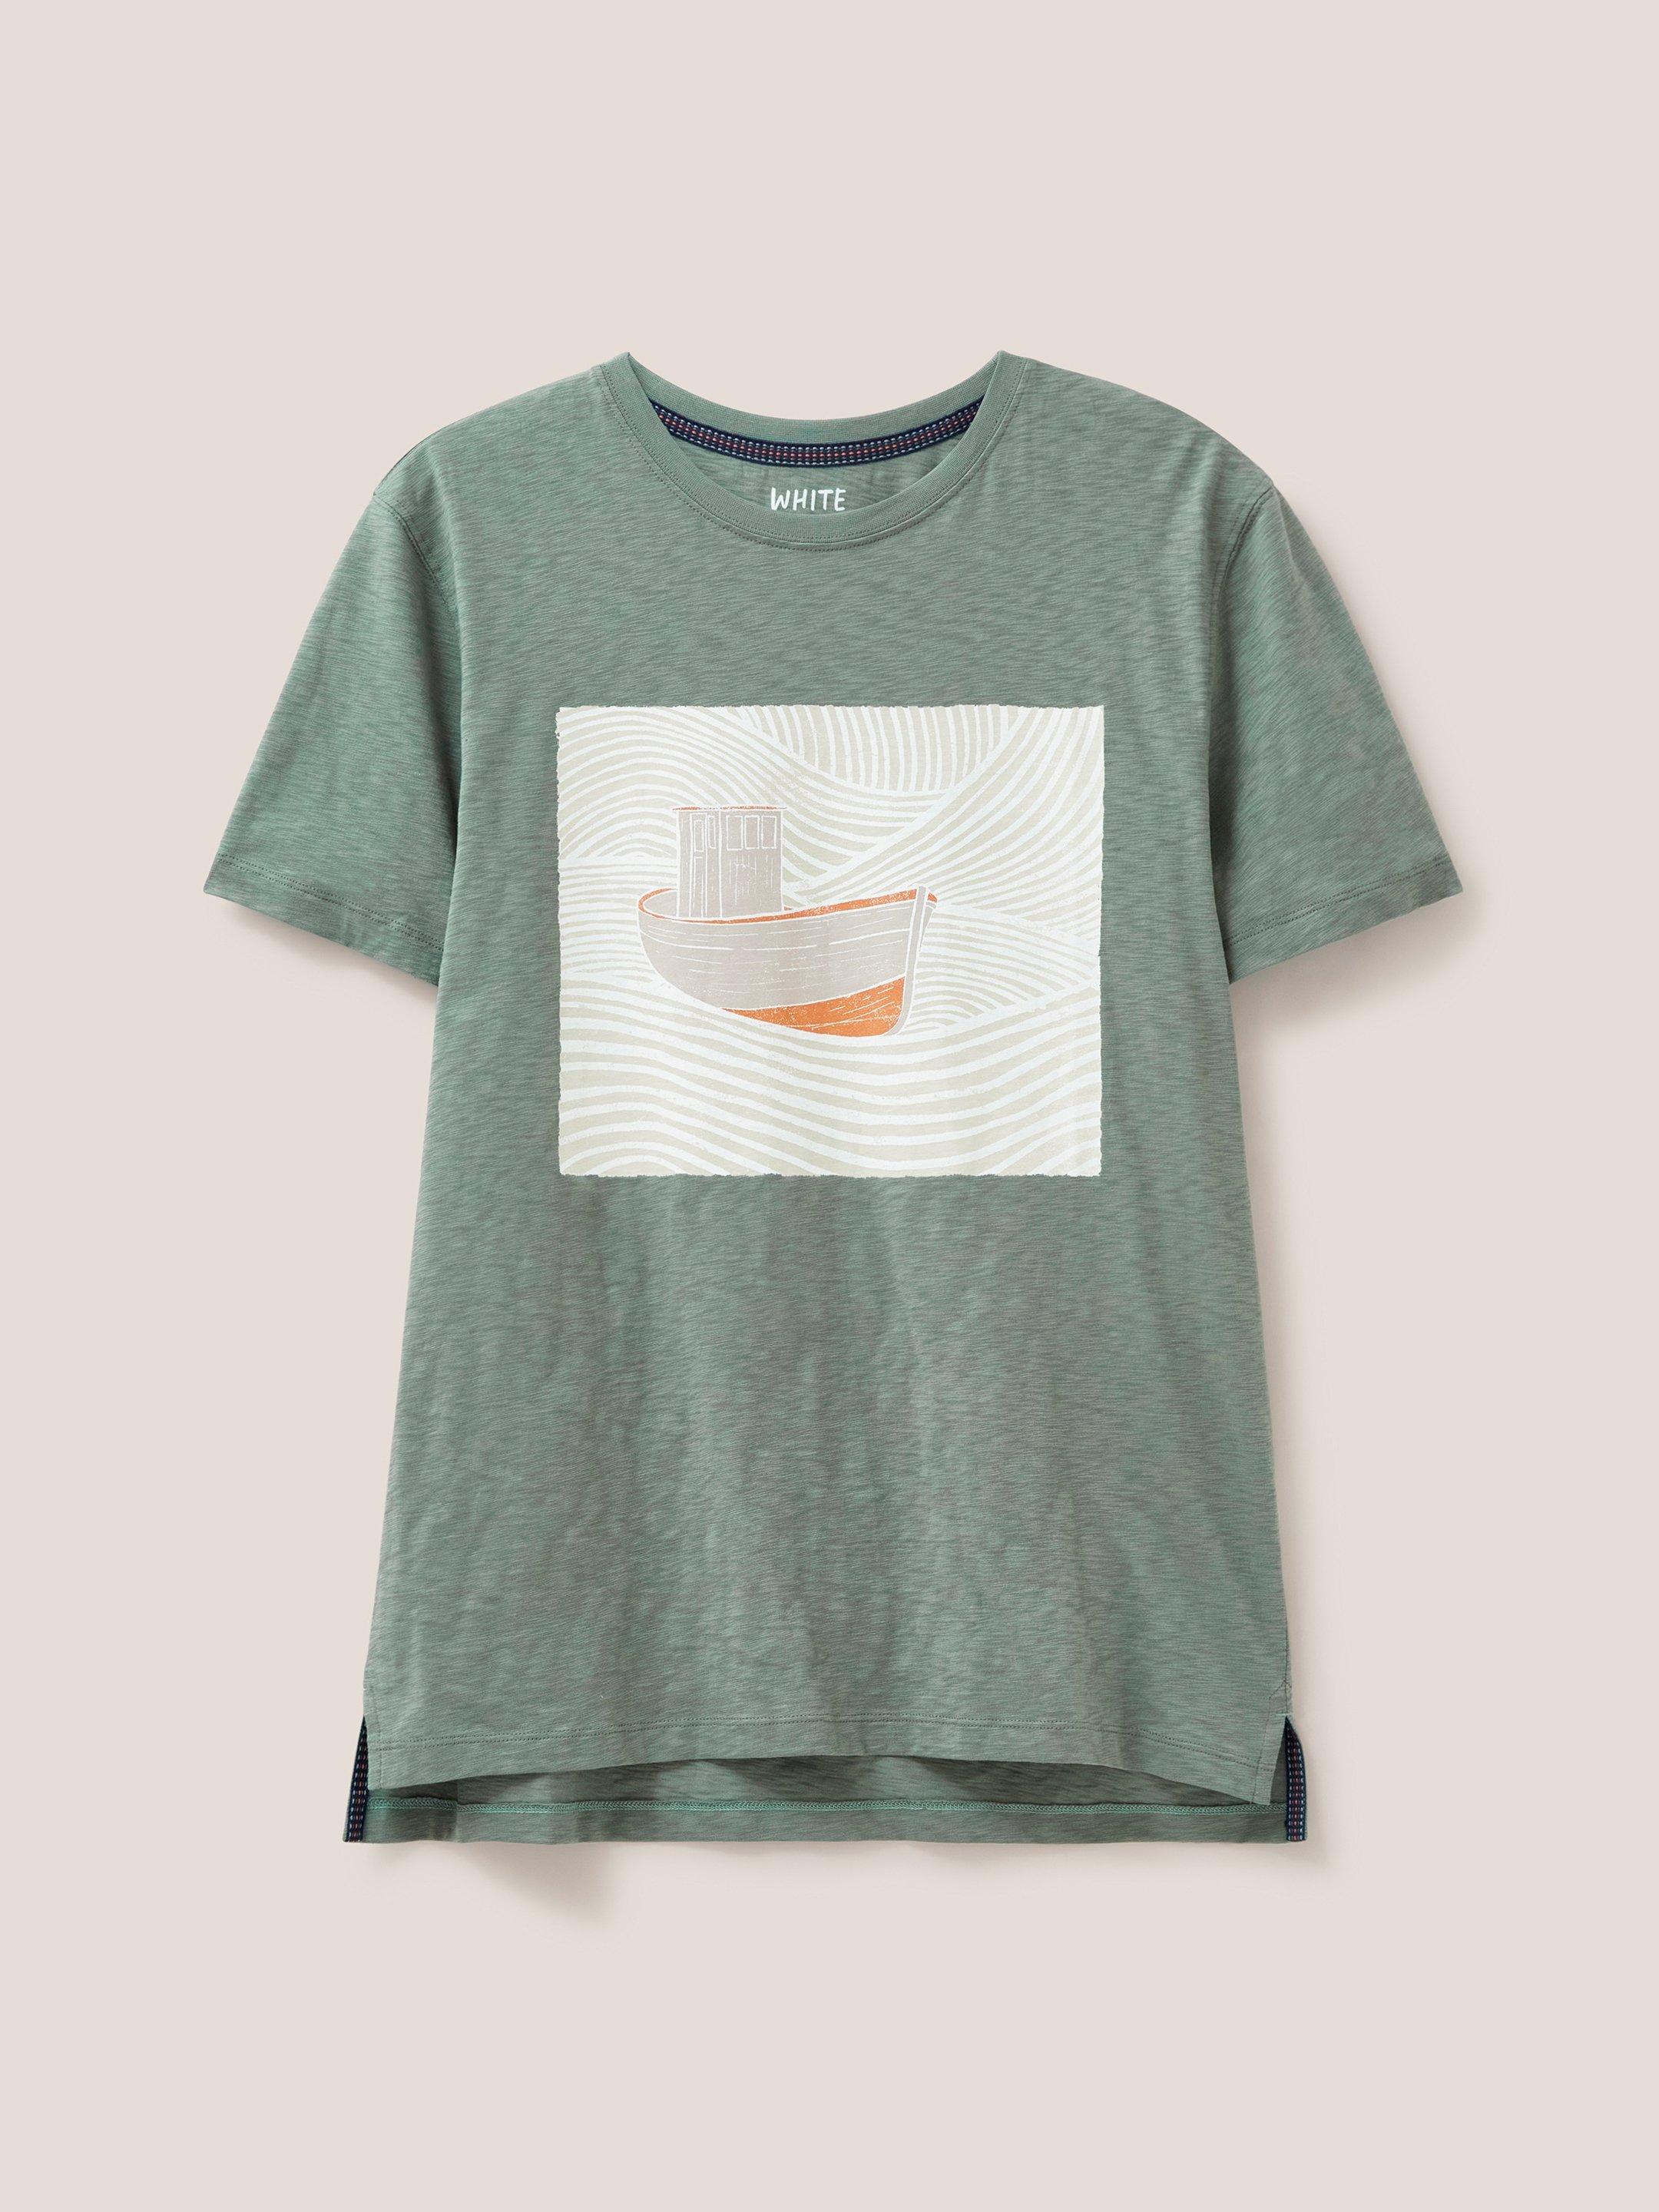 Trawler Graphic Tshirt in DUS GREEN - FLAT FRONT